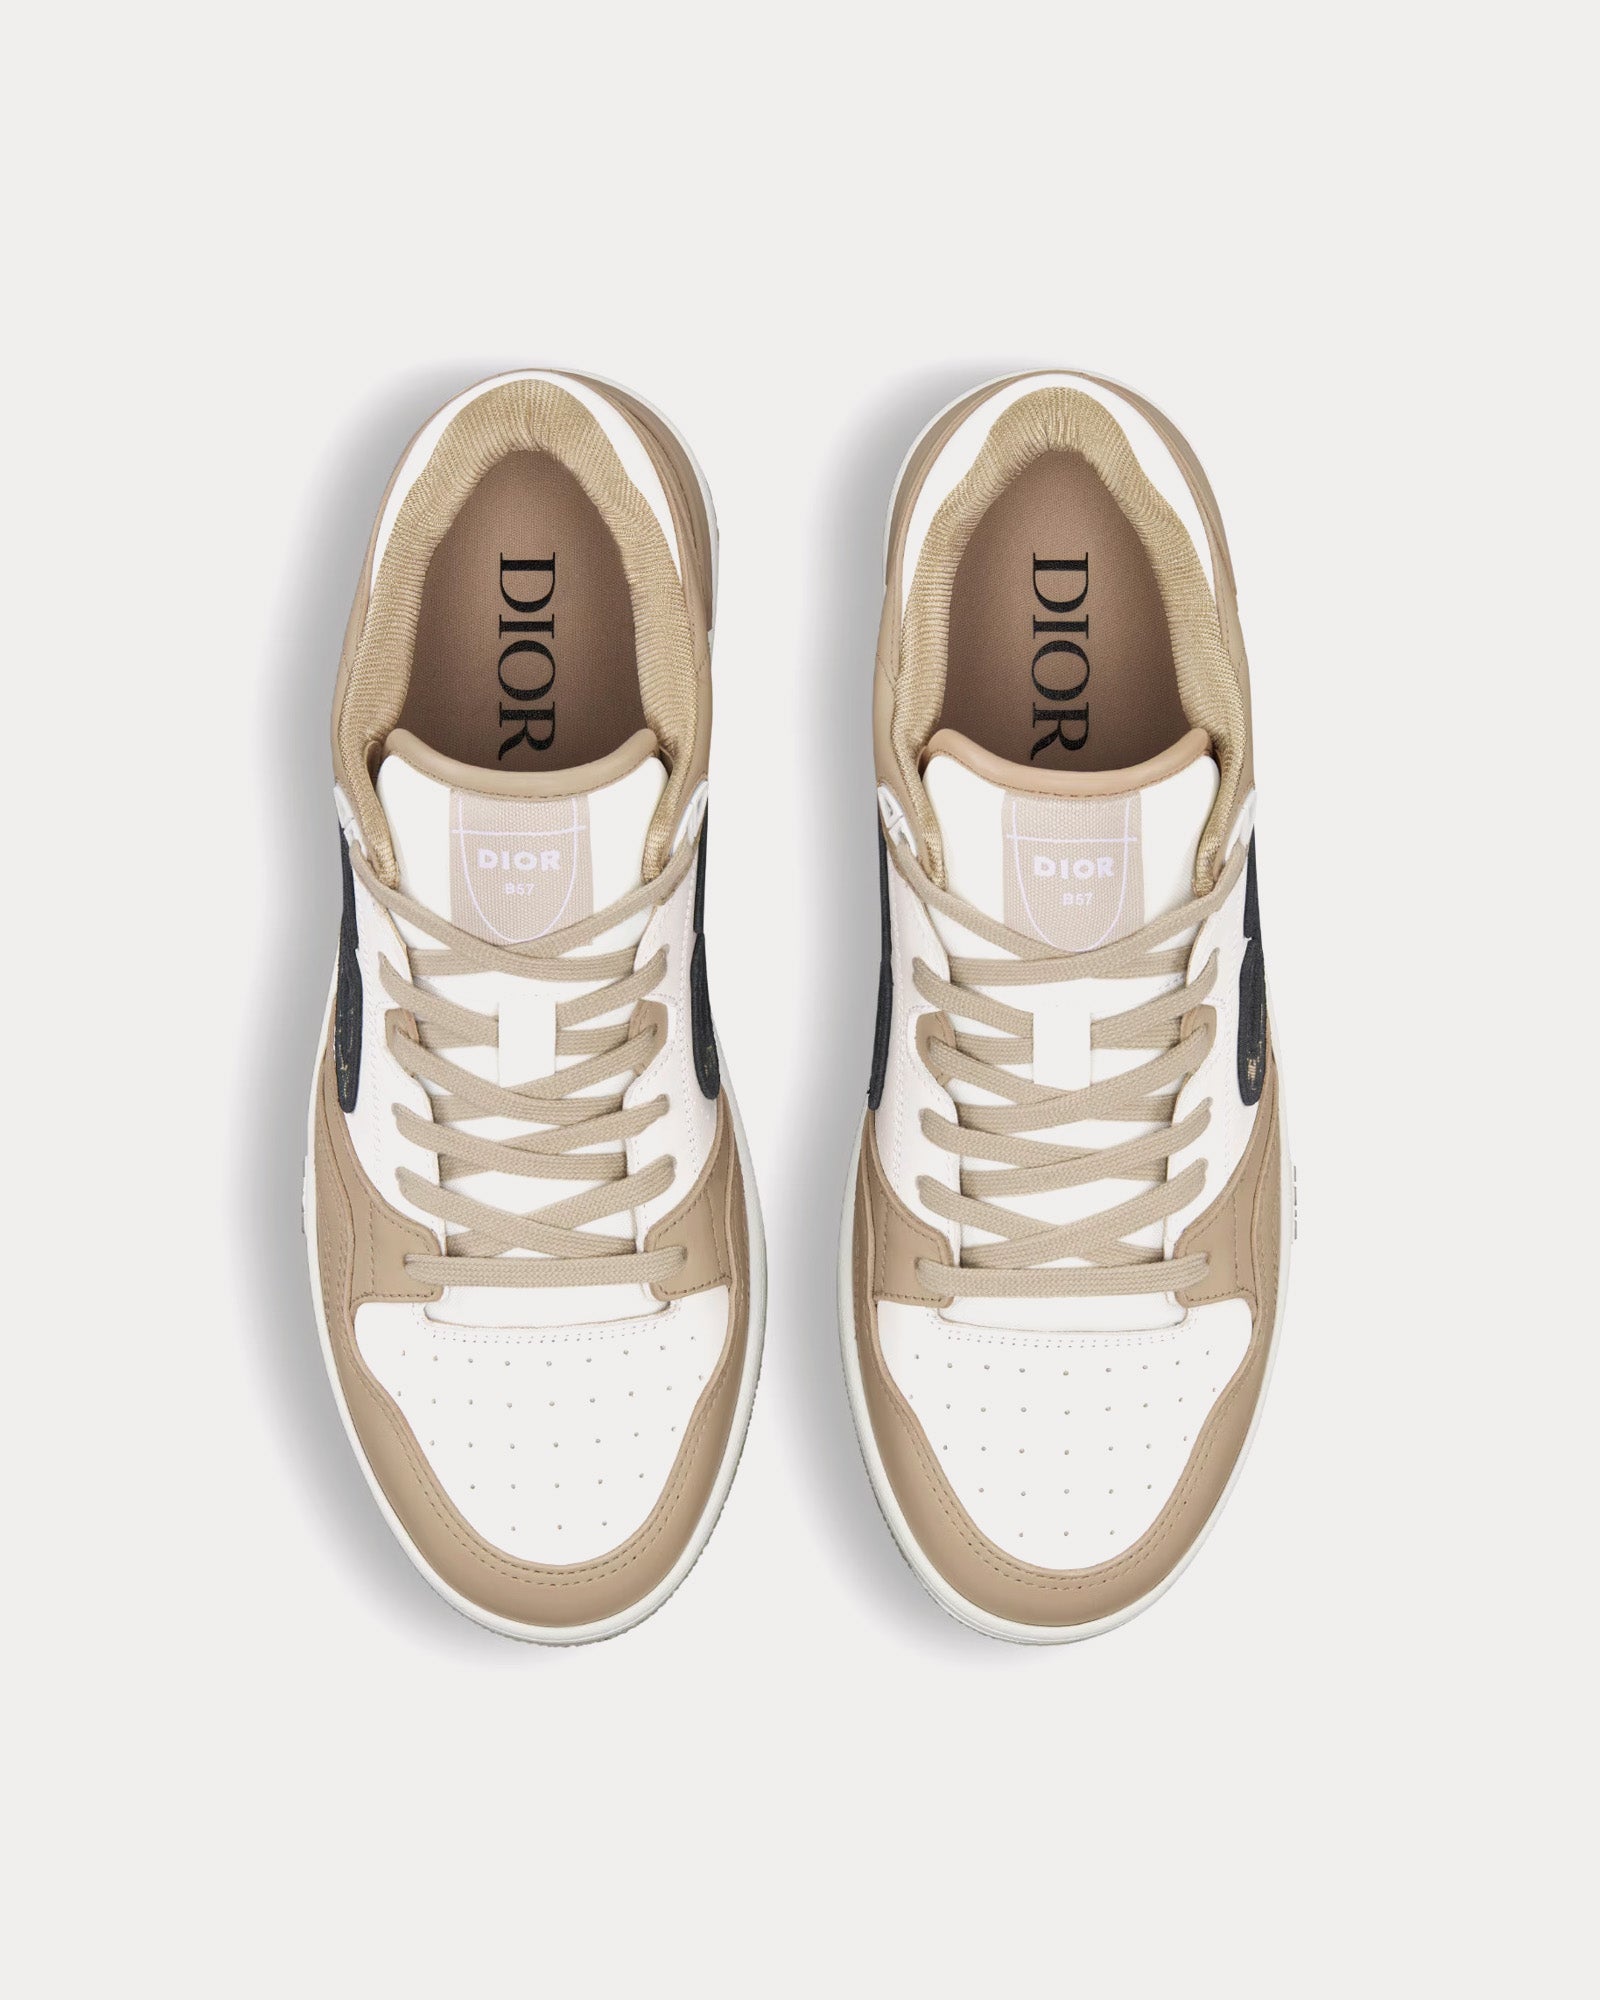 Dior - B57 Beige and White Smooth Calfskin with Beige and Black Dior Oblique Jacquard Low Top Sneakers